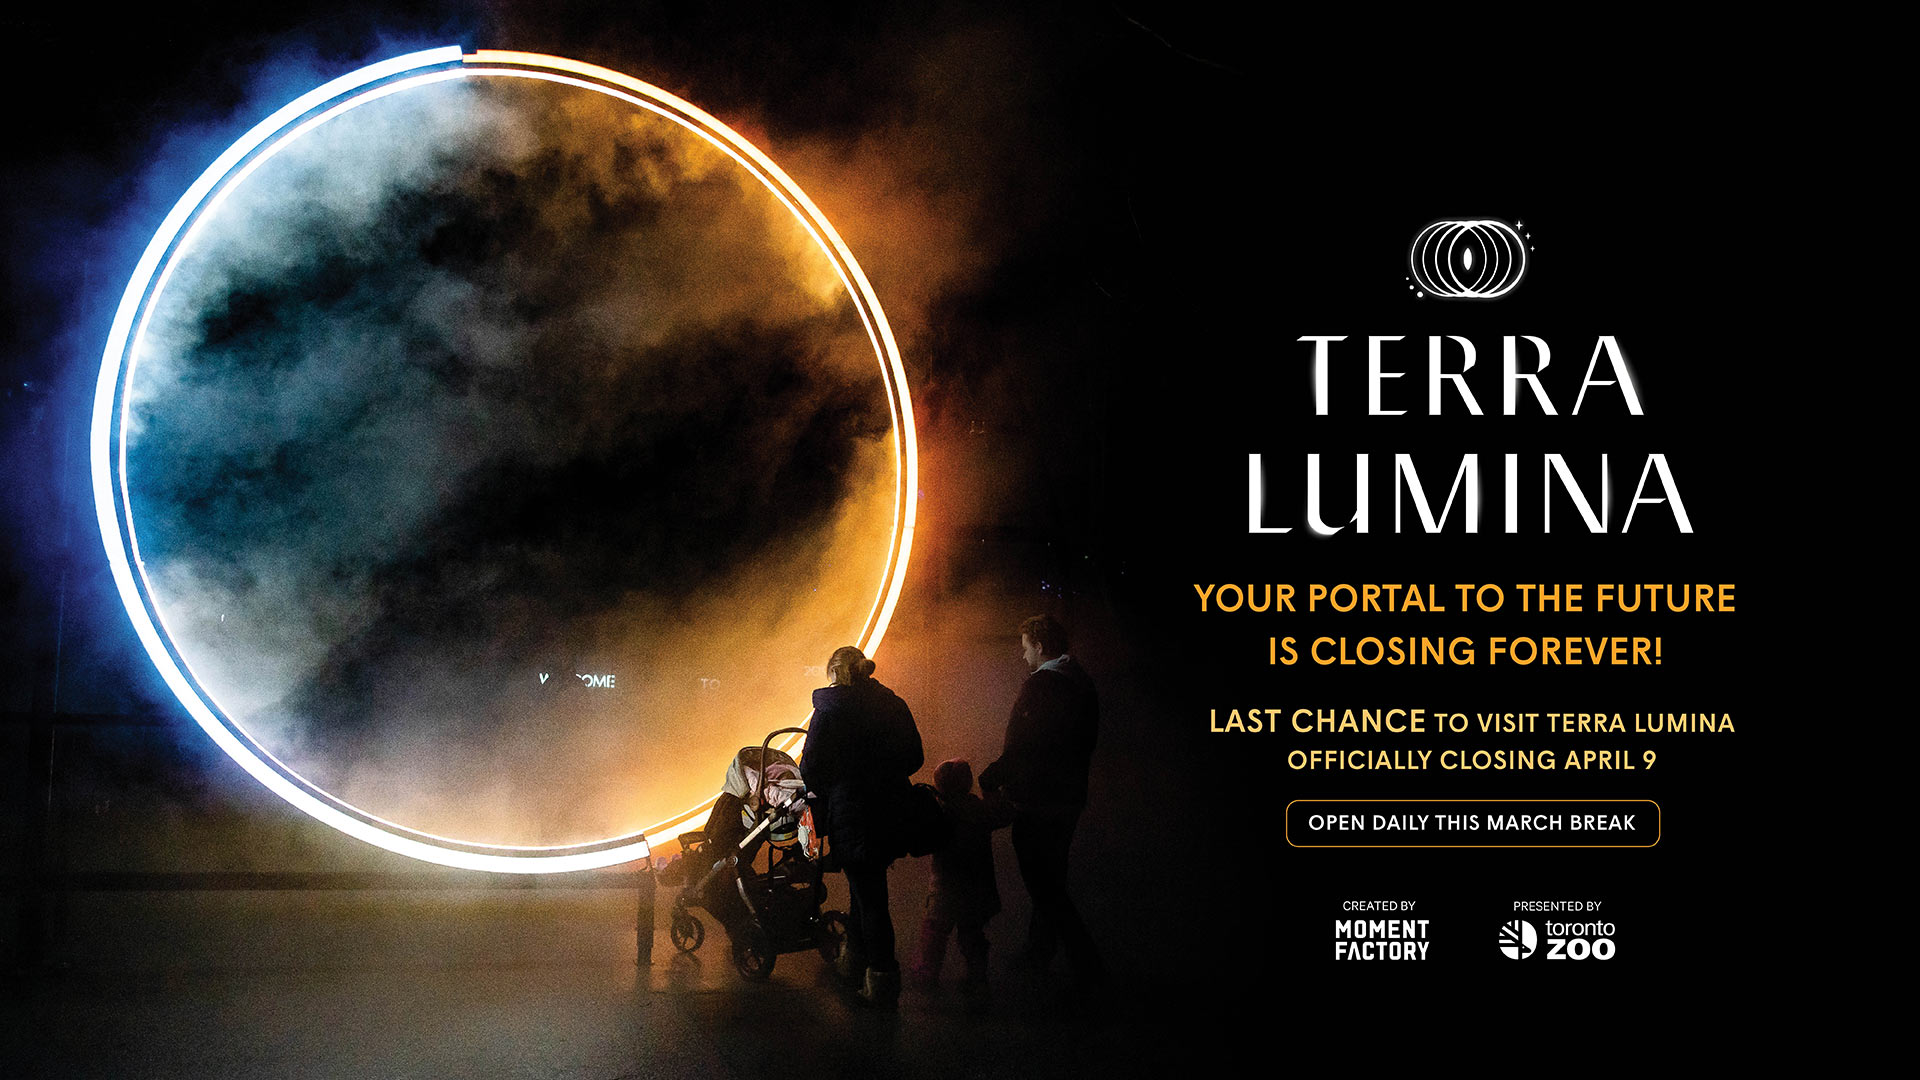 Terra Lumina Your portal to the future is closing forever! Last chance to visit Terra Lumina officially closing April 9. Open Daily this march break